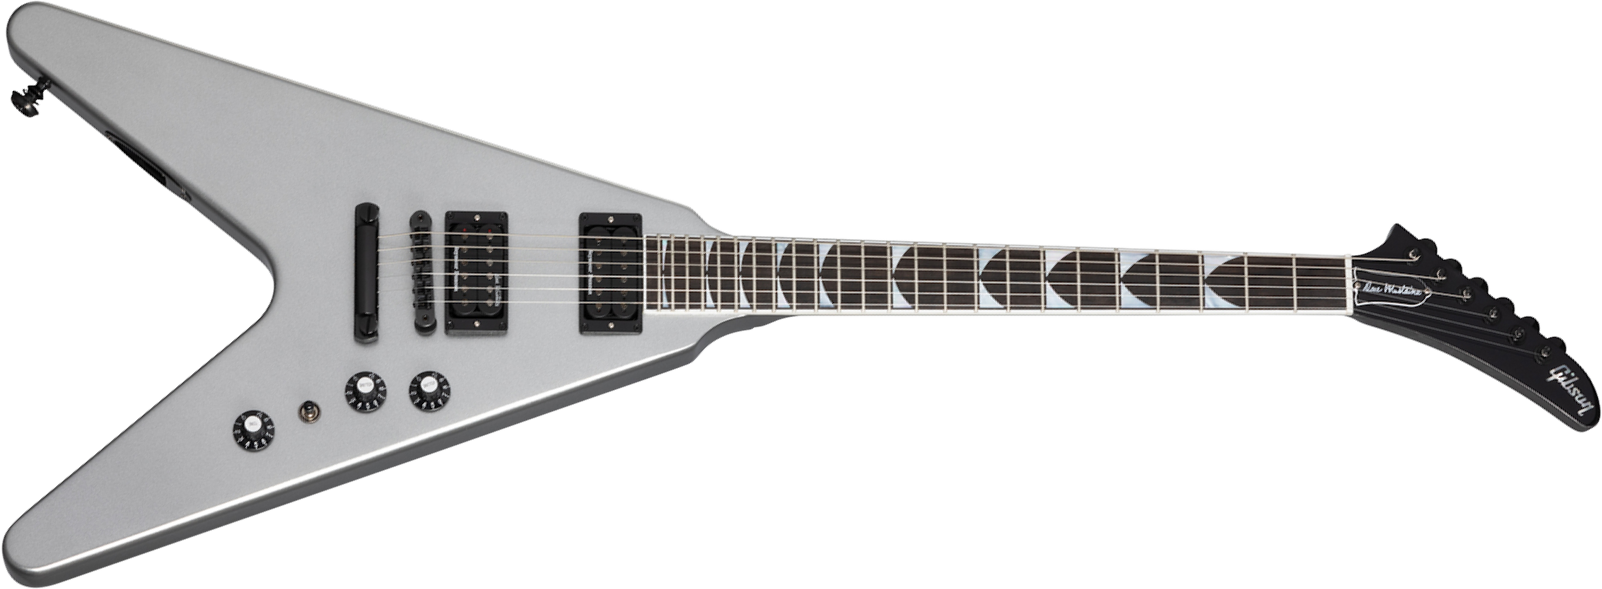 Gibson Dave Mustaine Flying V Exp Signature 2h Ht Eb - Silver Metallic - Guitarra electrica metalica - Main picture